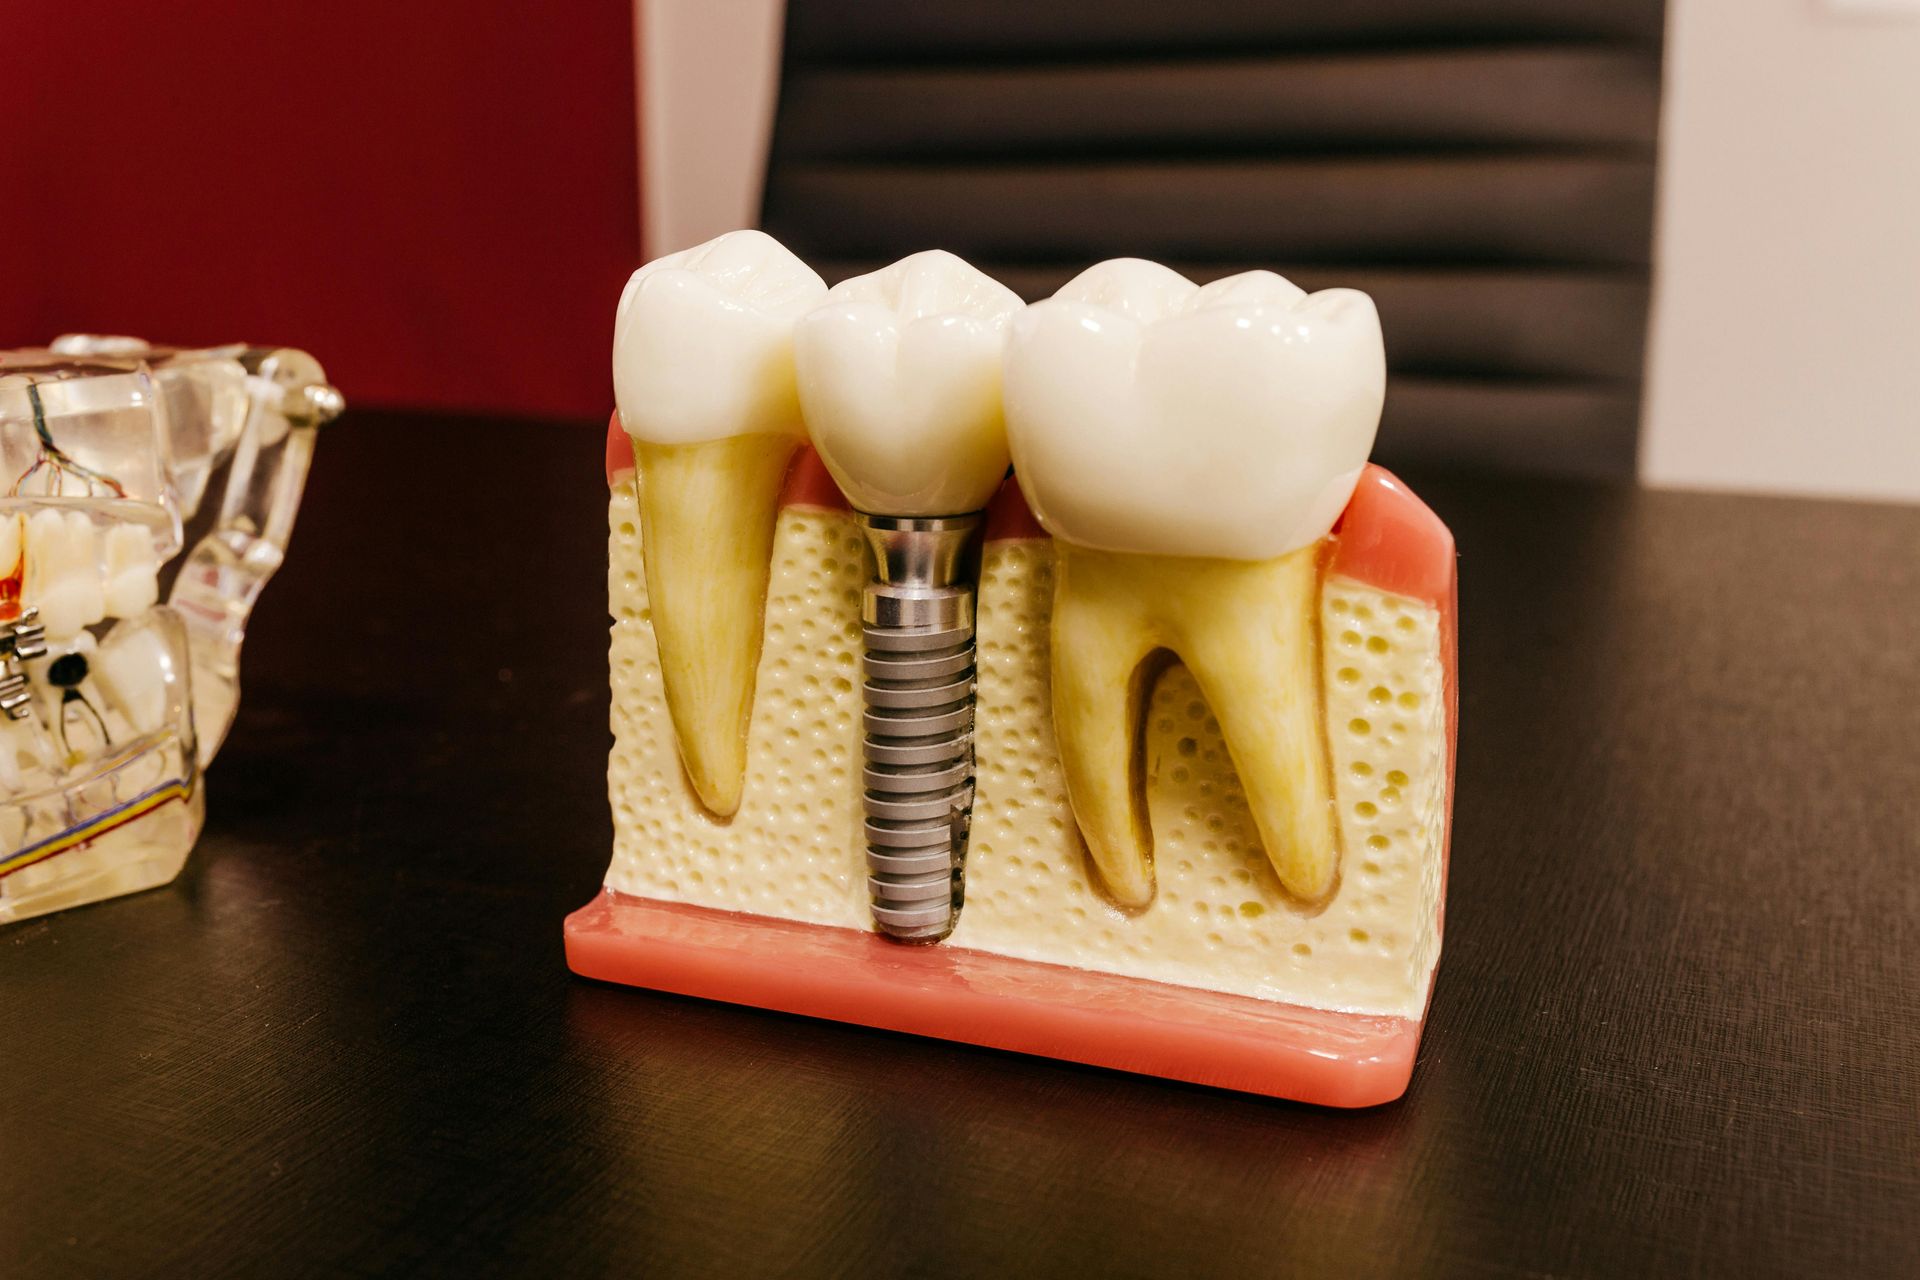 a model of a dental implant is sitting on a table.